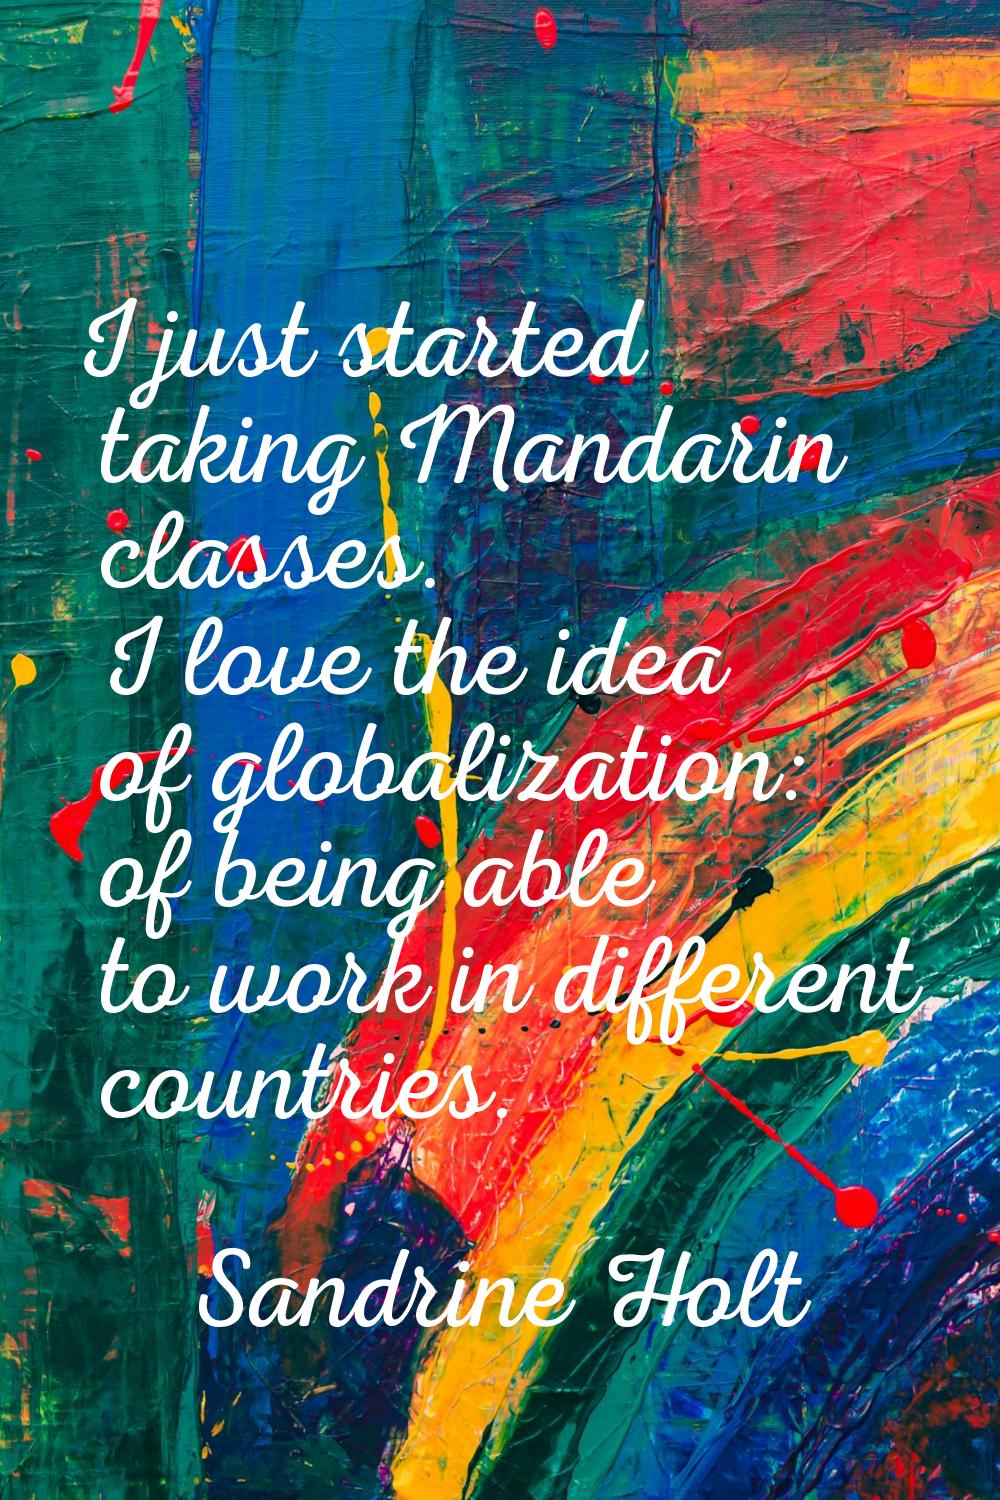 I just started taking Mandarin classes. I love the idea of globalization: of being able to work in 